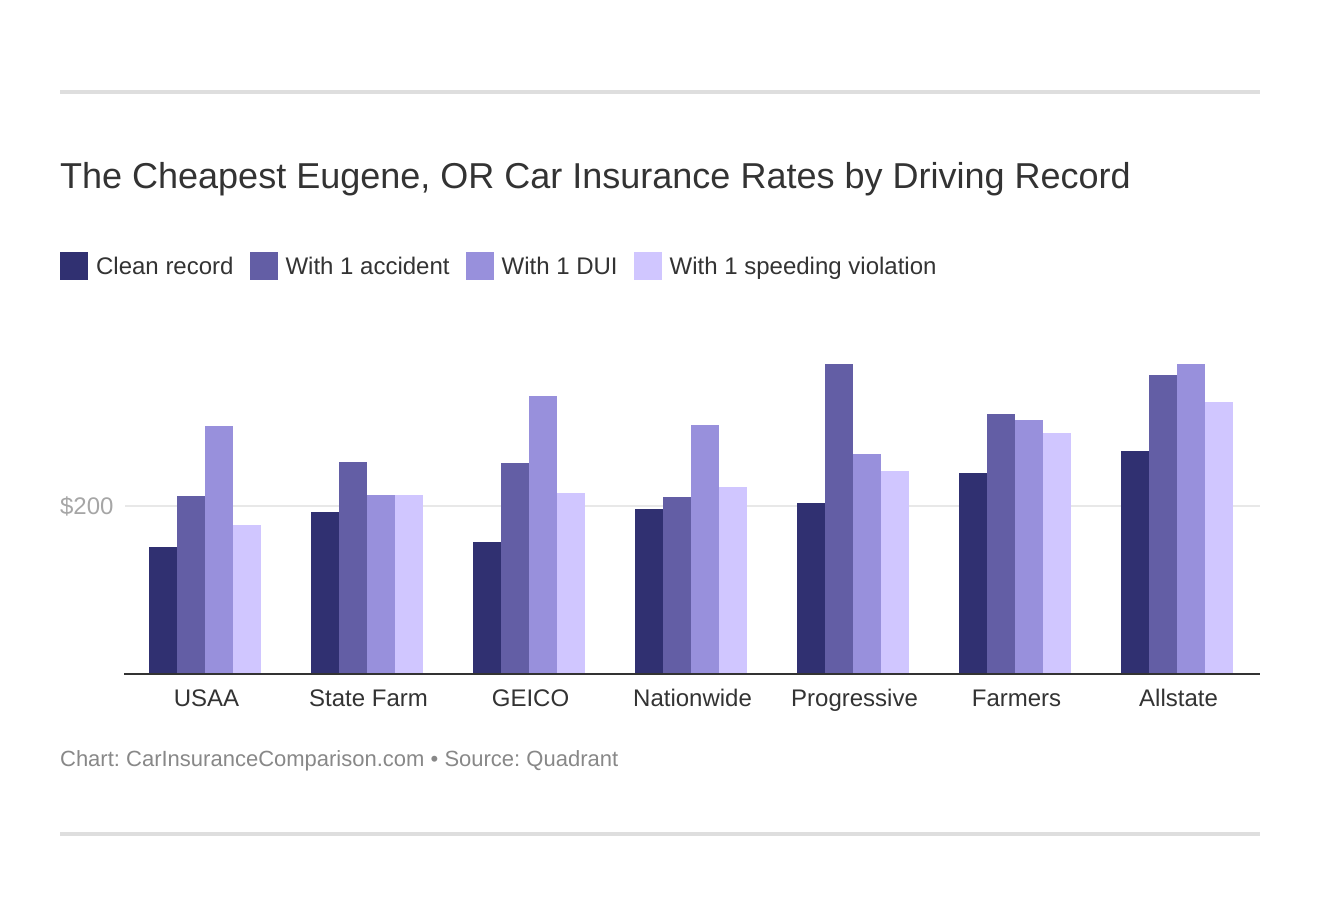 The Cheapest Eugene, OR Car Insurance Rates by Driving Record